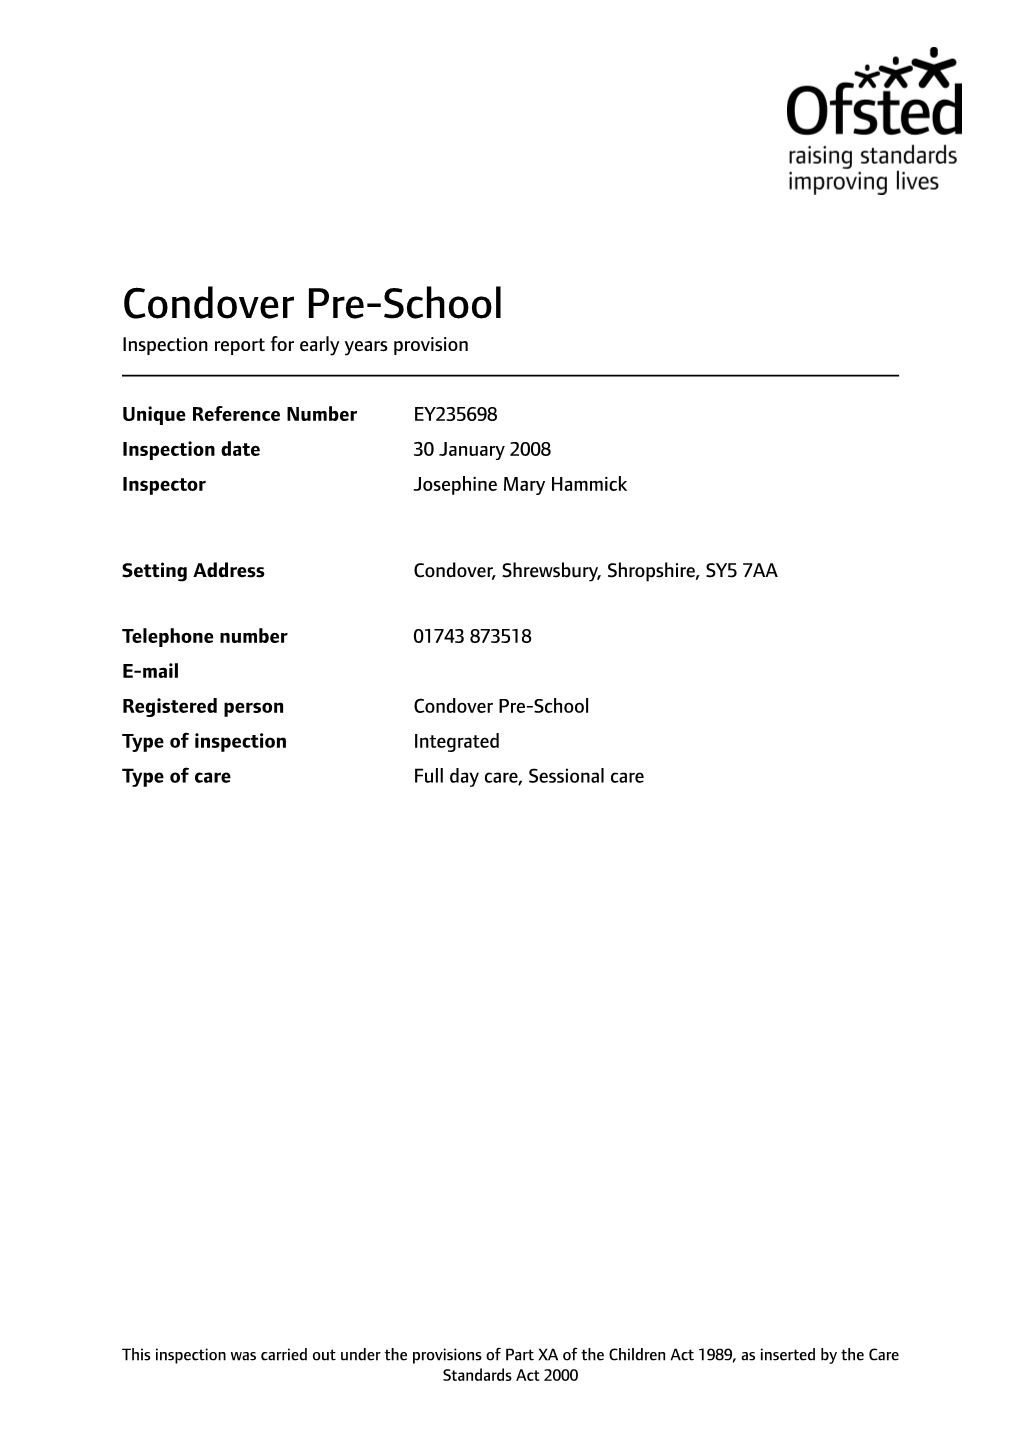 Condover Pre-School Inspection Report for Early Years Provision